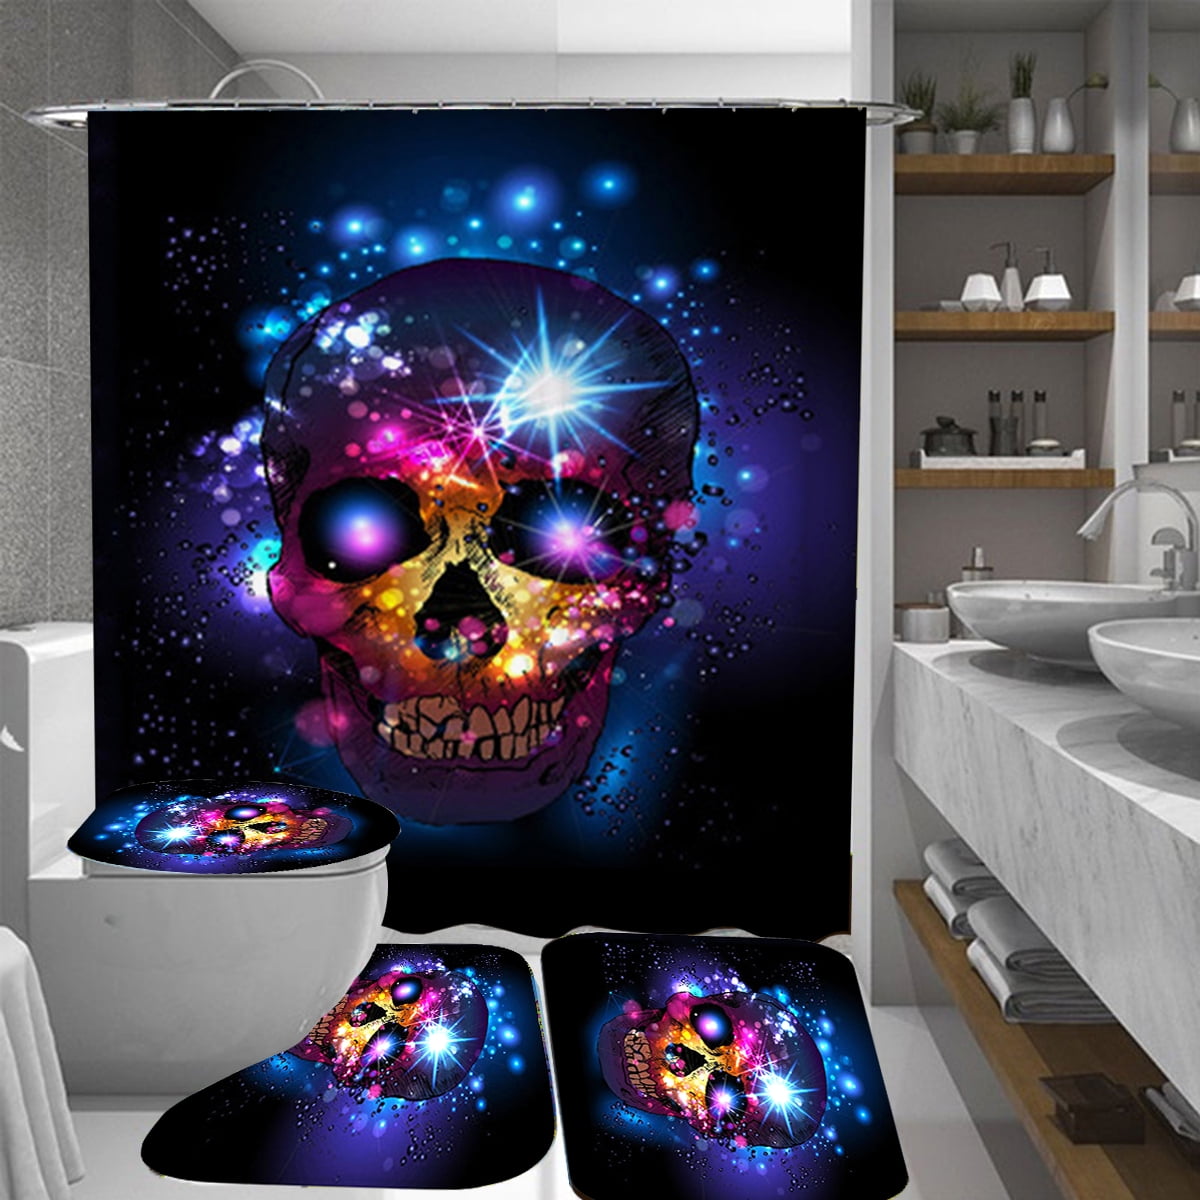 Skull Polyester Microfiber Waterproof Fabric Shower Curtains 4-Piece Bathroom Set Girly Skull and Crossbones Checkered Pattern Simple Artistic Design Image Machine Washable Bright Color W72 xL72